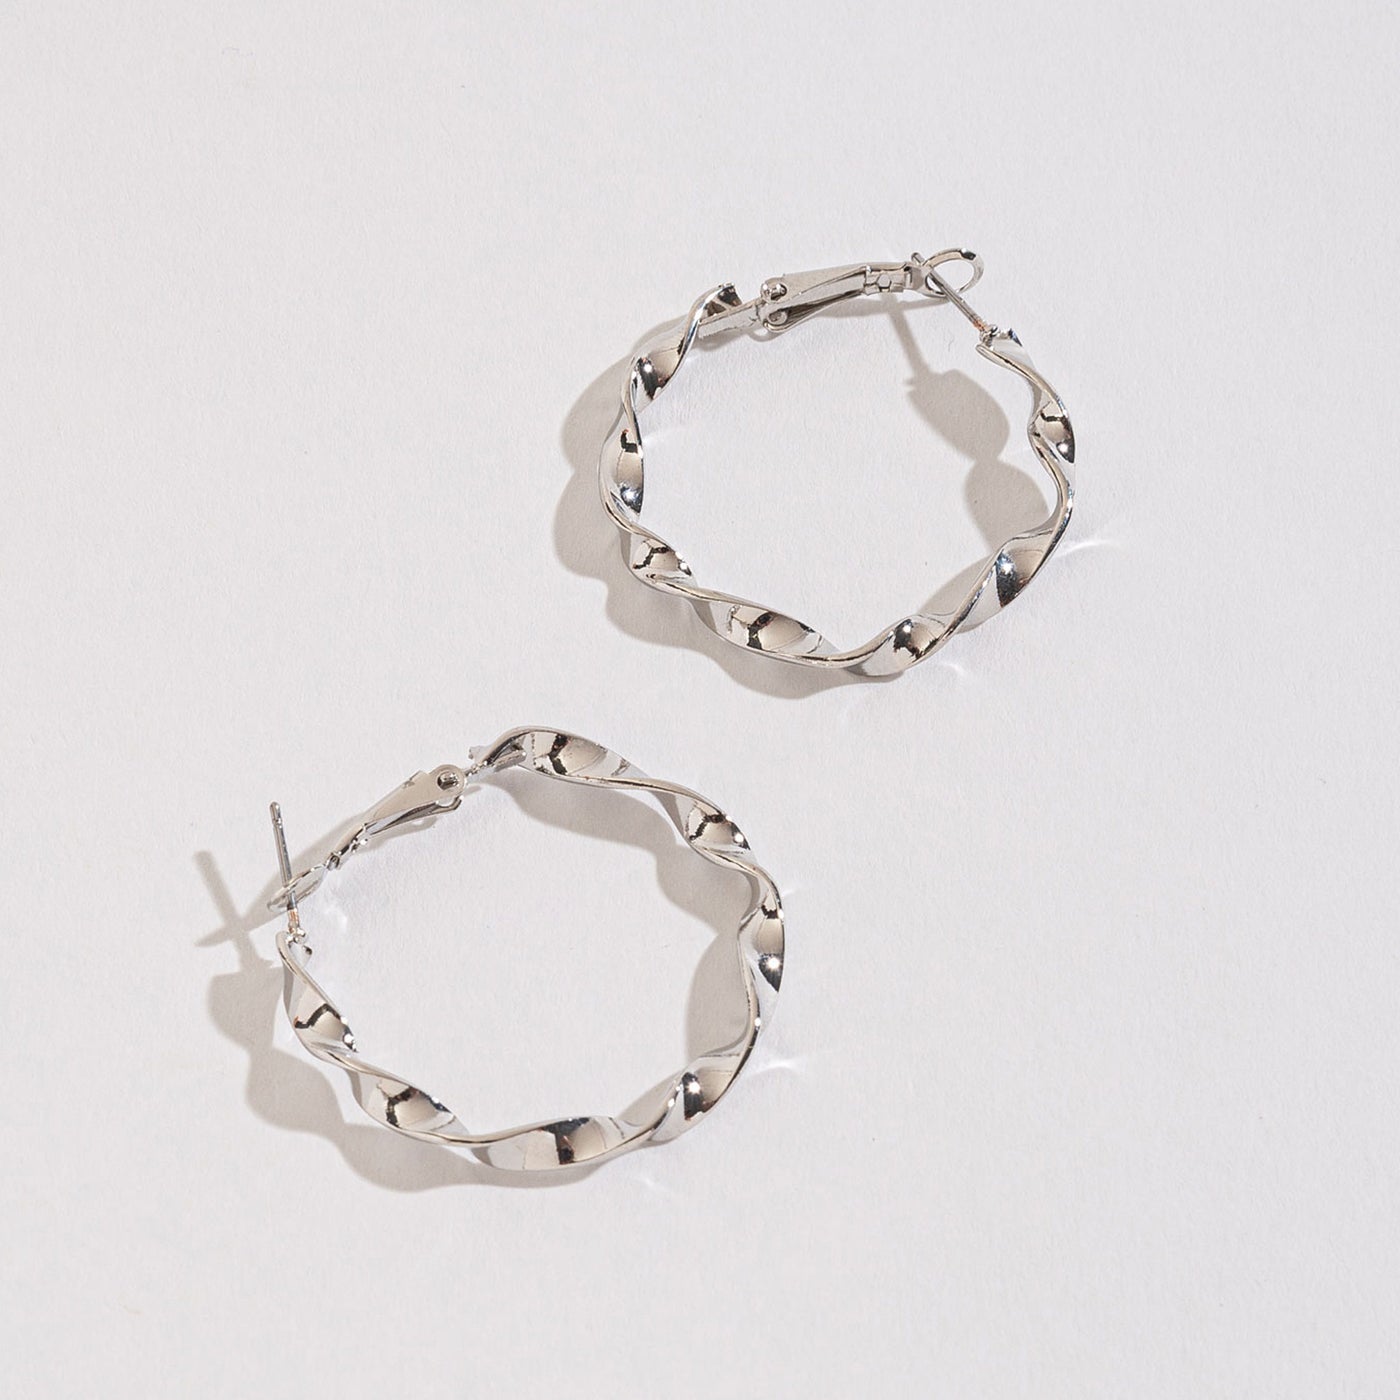 silver twist hoops on a white background.